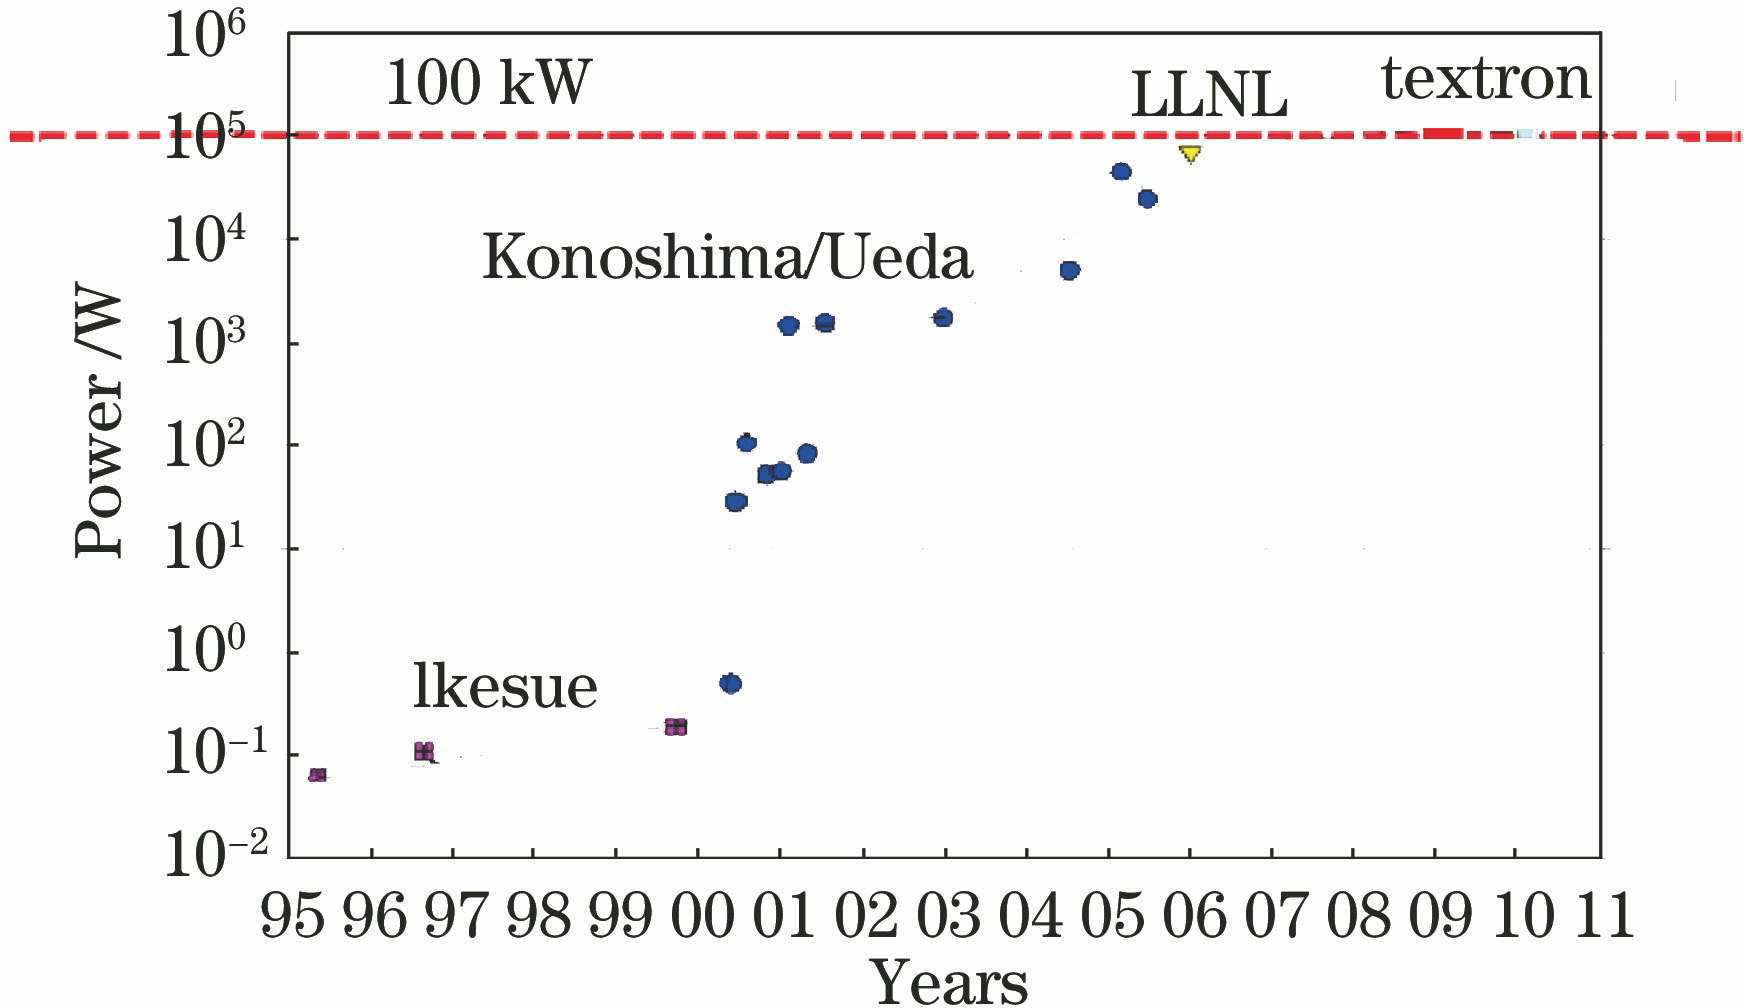 Evolution of laser output power versus year for Nd∶YAG ceramic lasers[19]